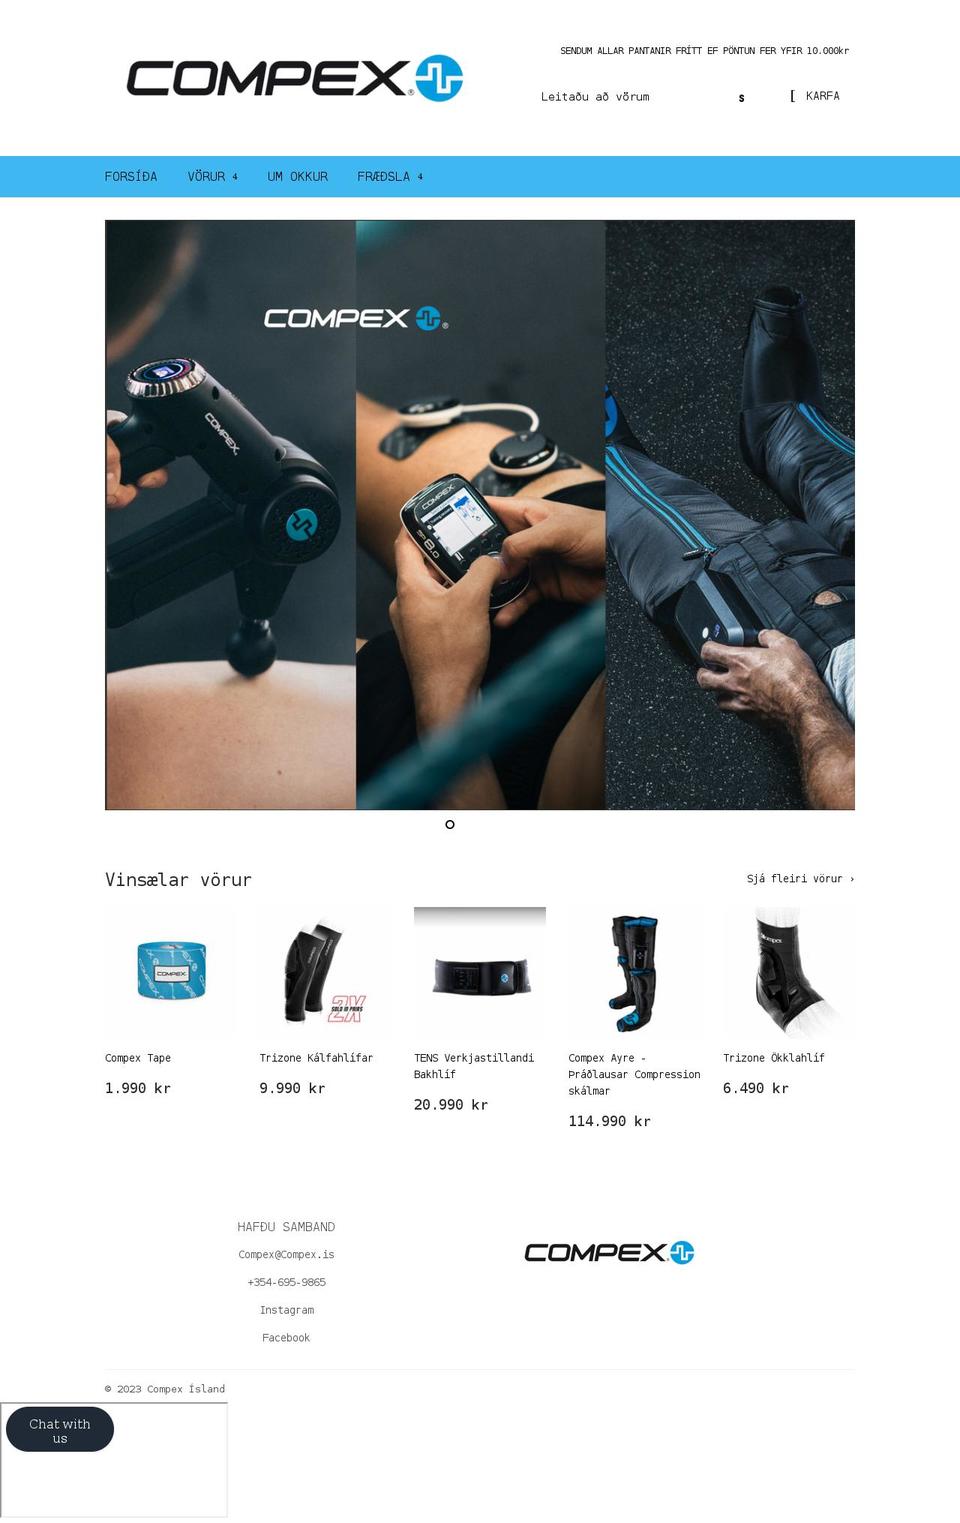 compex.is shopify website screenshot